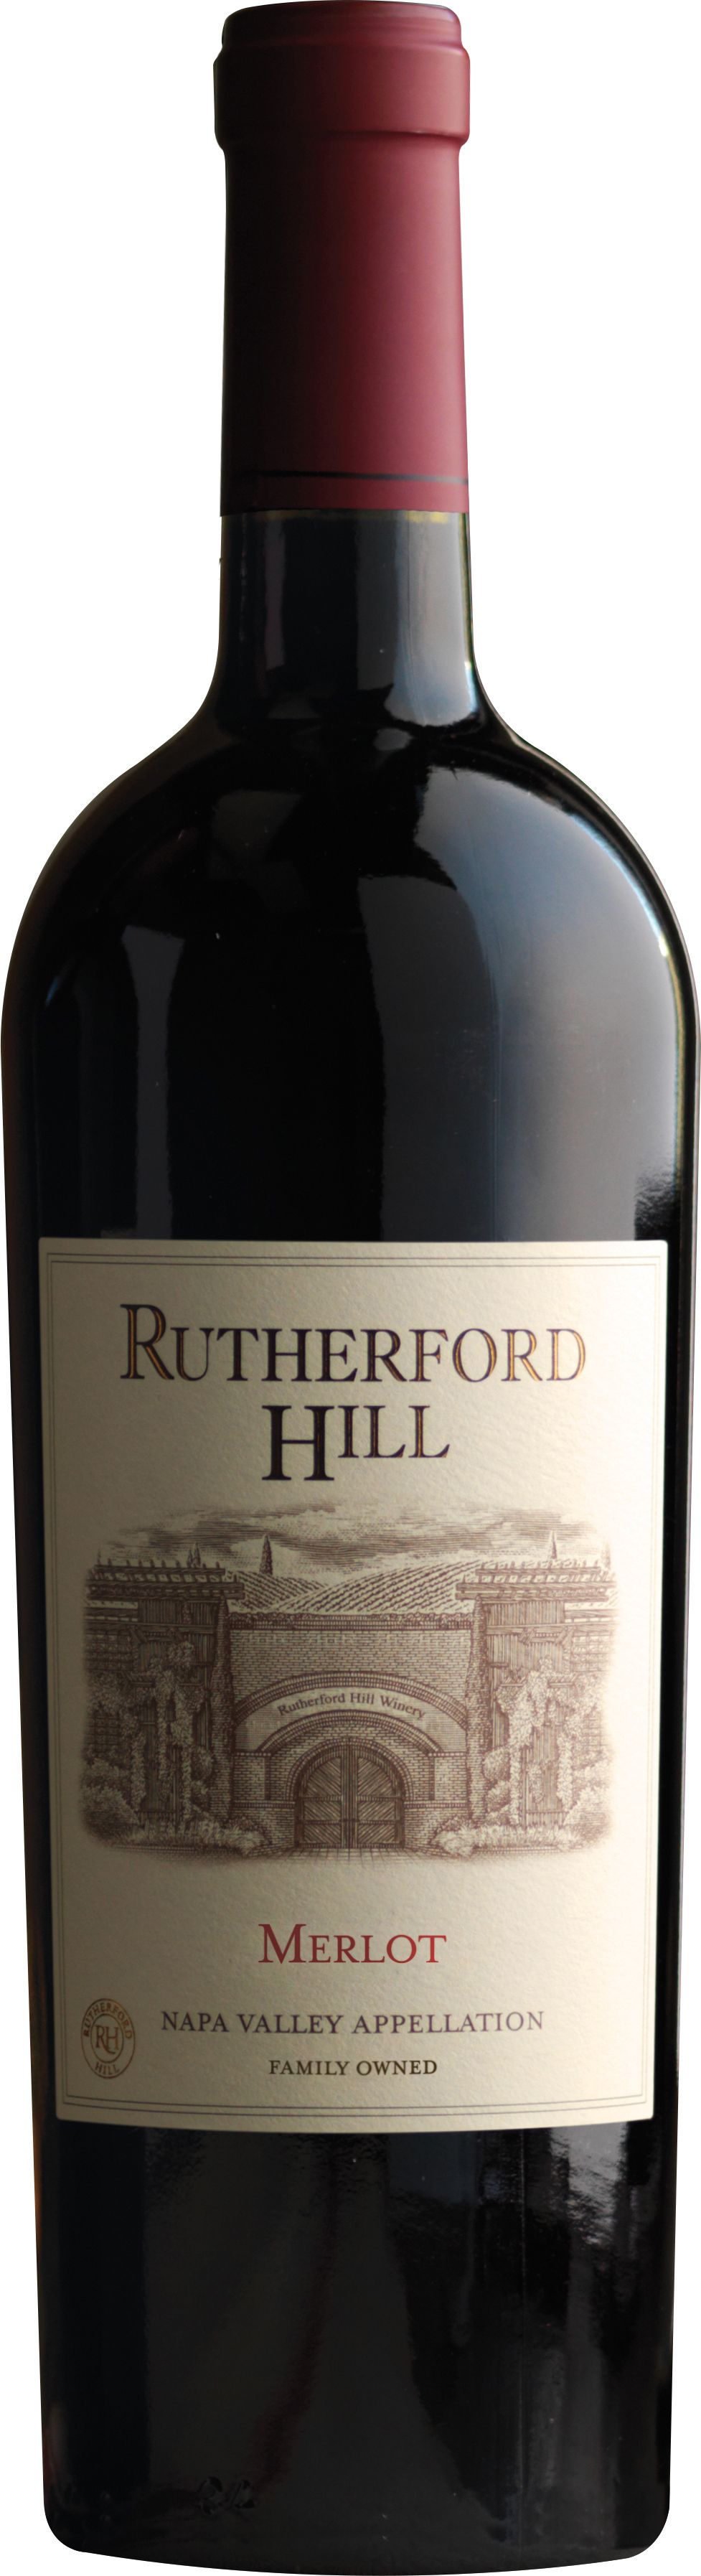 Rutherford Hill Merlot Napa Valley